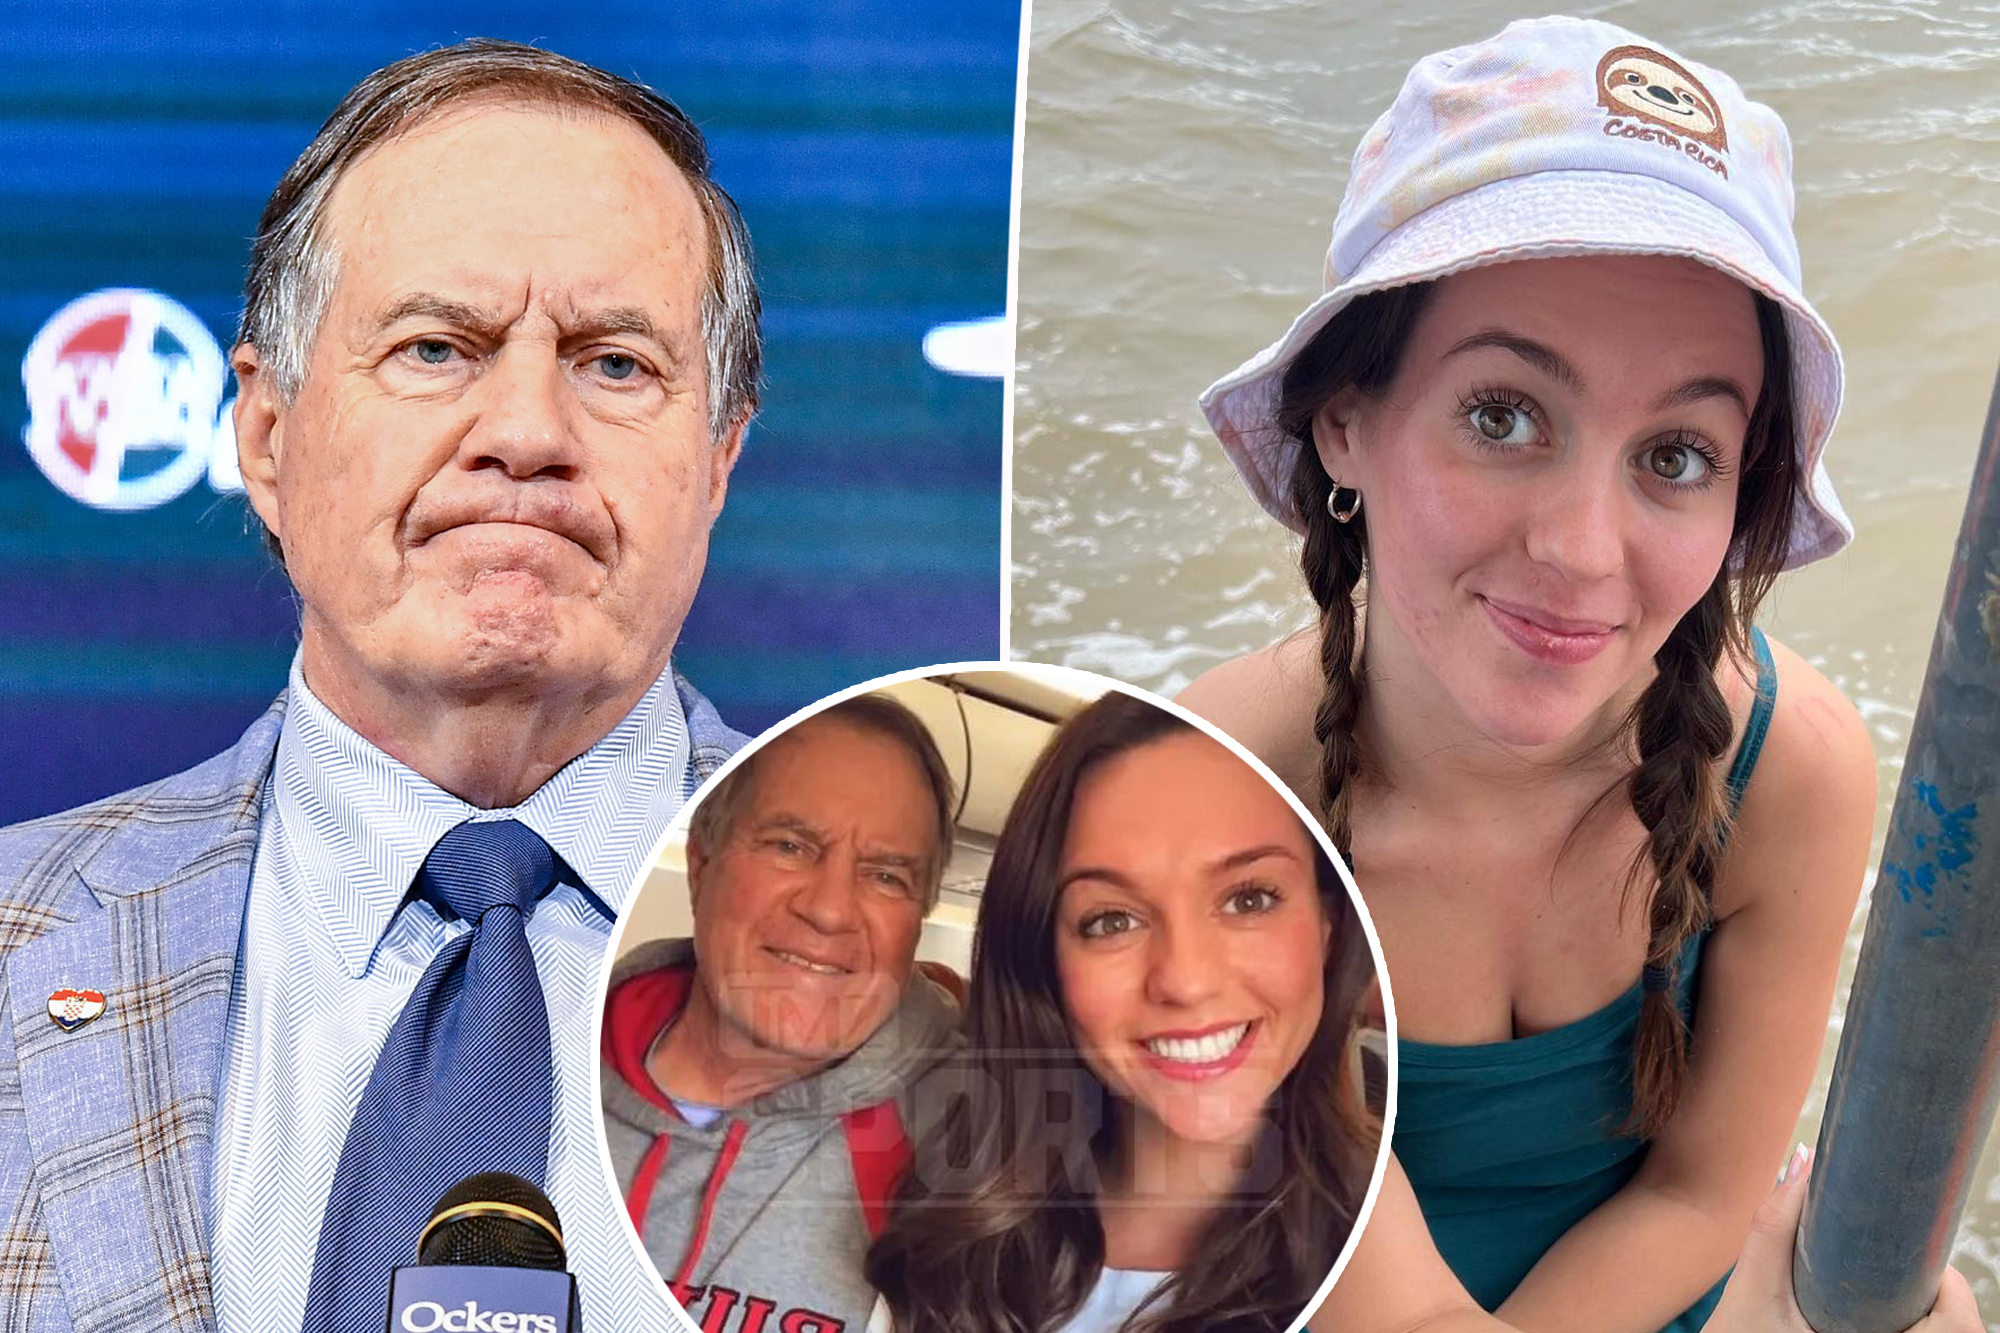 23-Year-Old Cheerleader Claps Back at Critics of Her Relationship with 72-Year-Old Bill Belichick: 